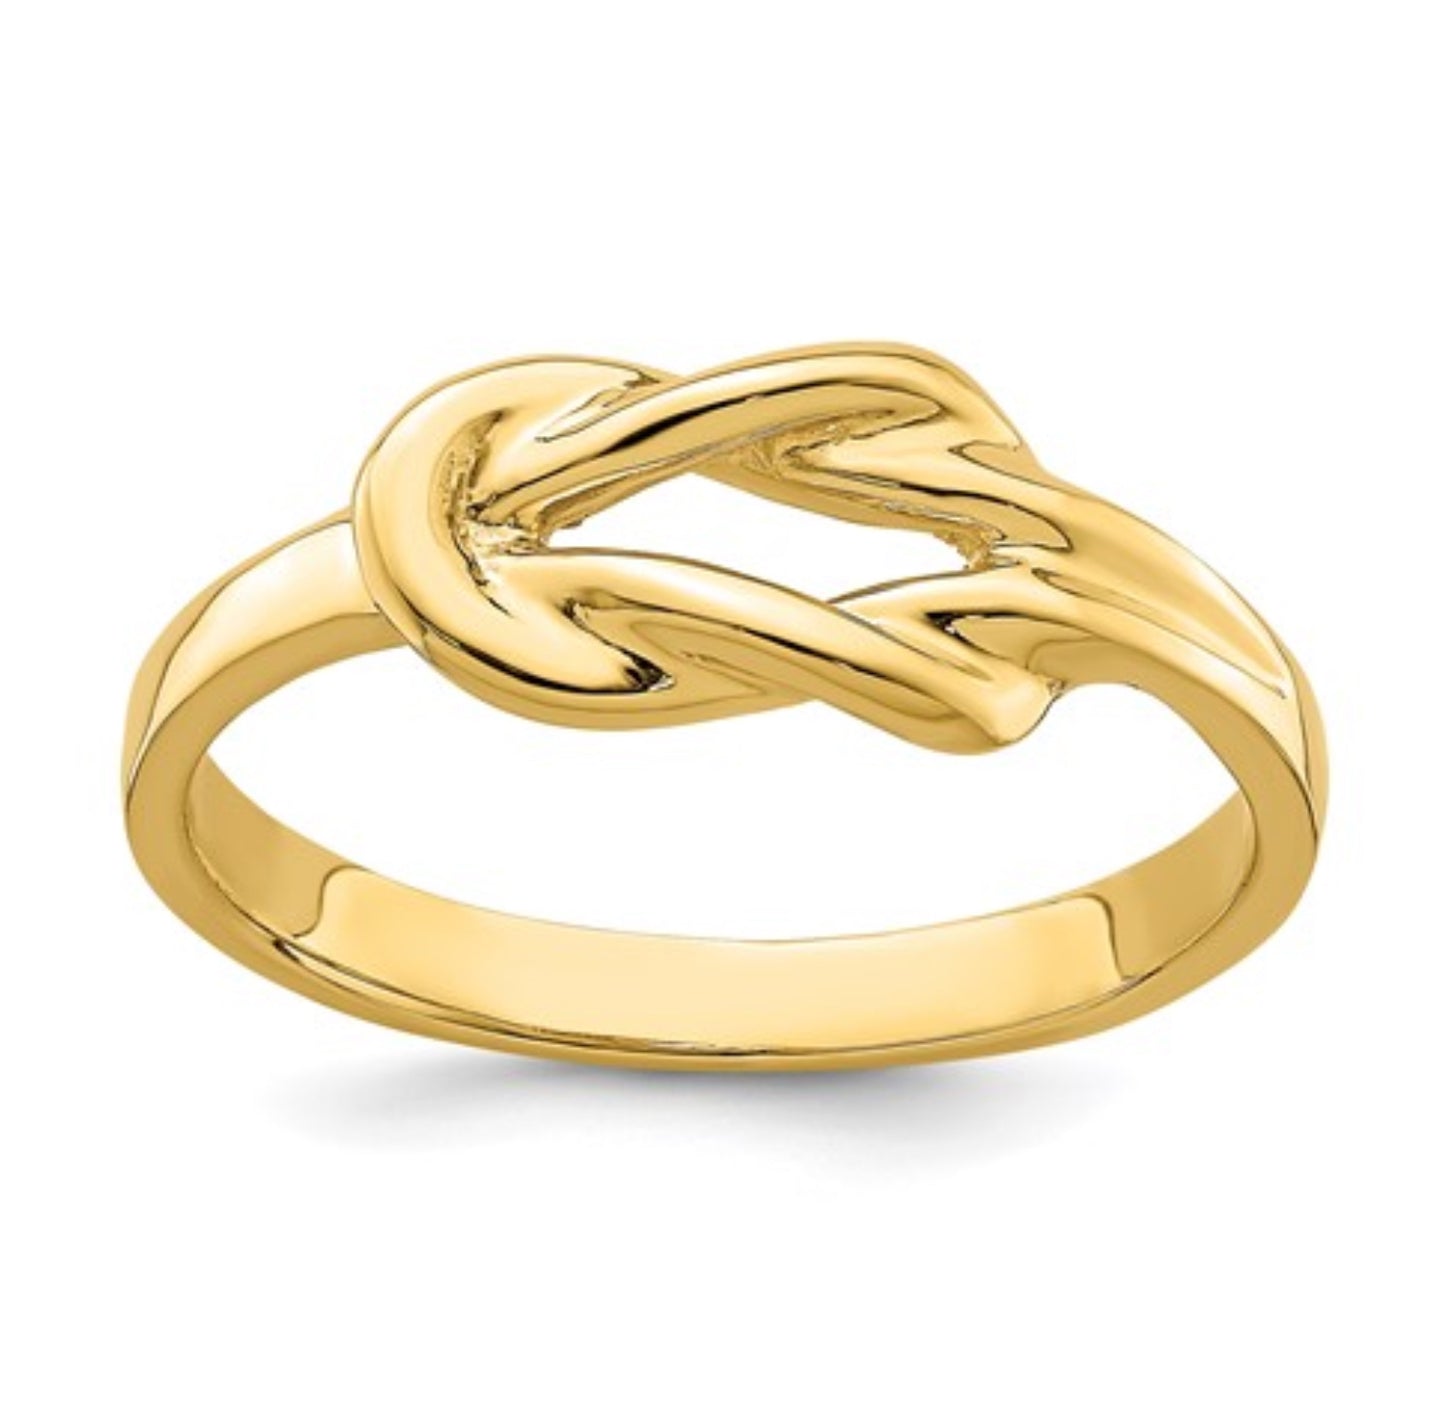 14k Yellow Gold Love Knot Ring